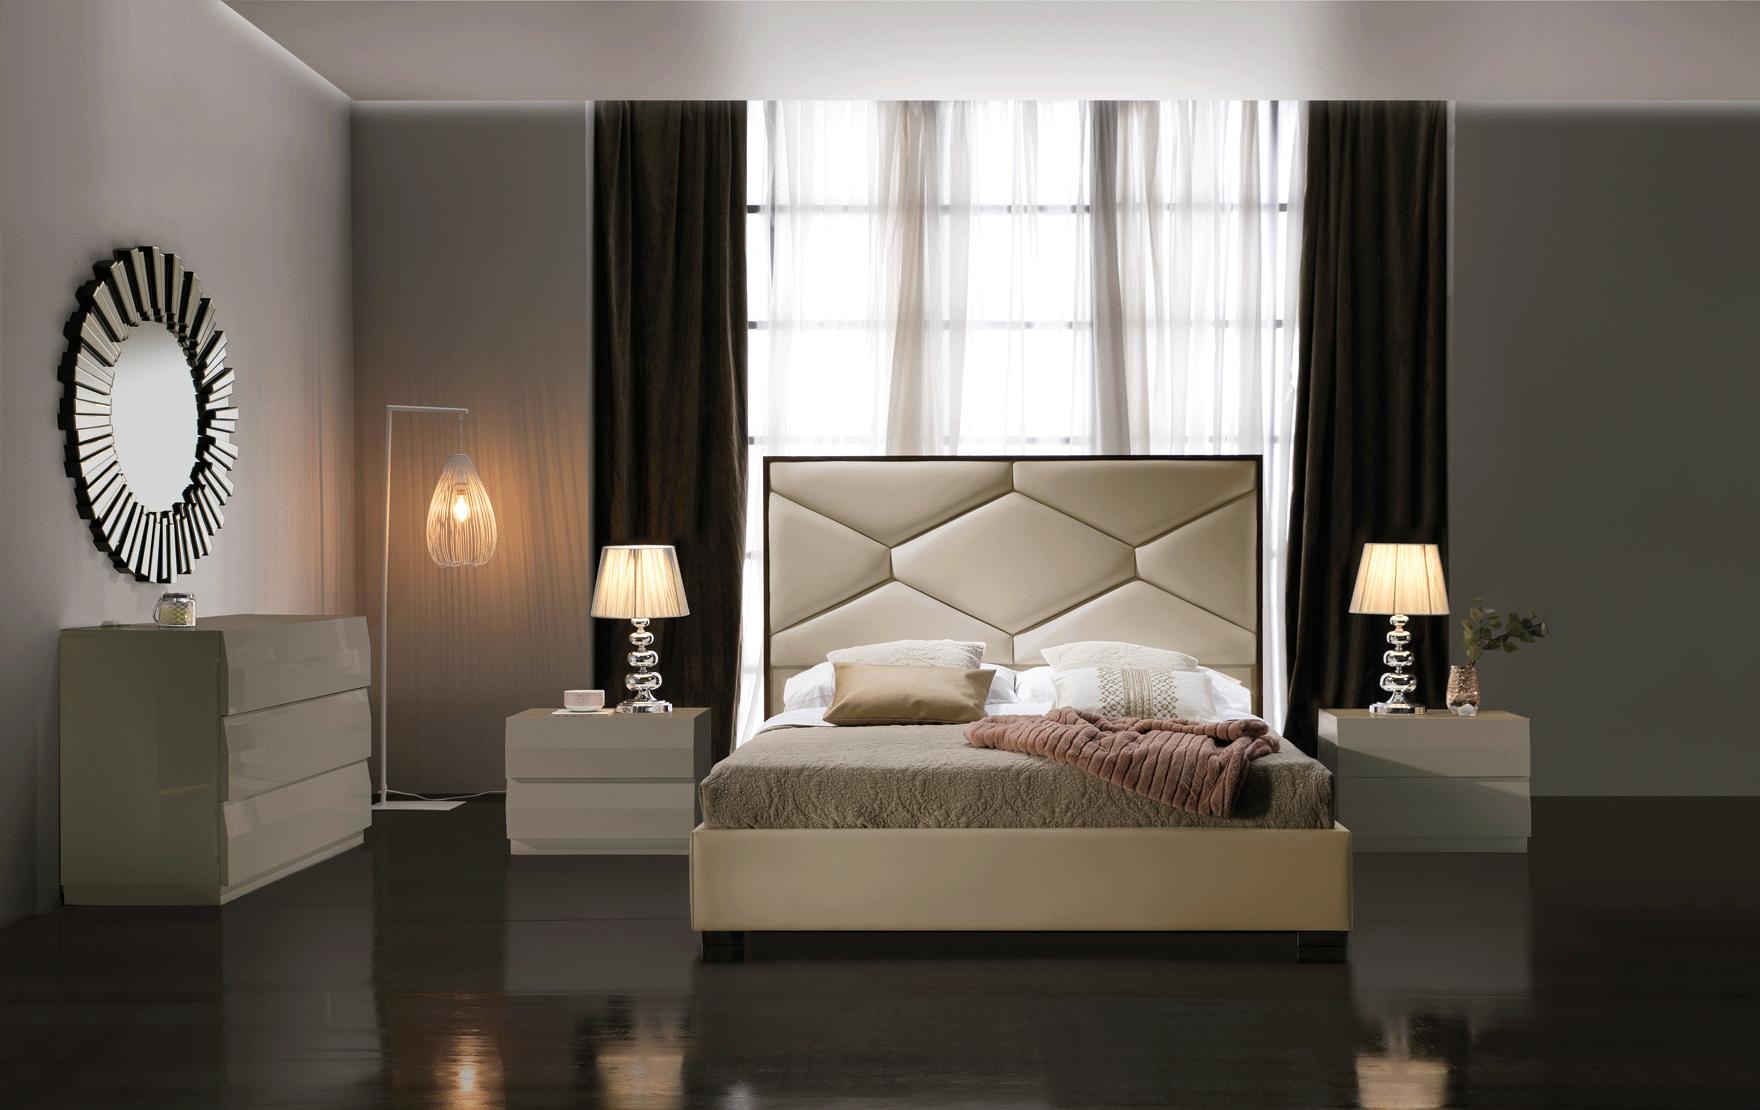 Contemporary, Modern Storage Bedroom Set MARTINABEDQS MARTINABEDQS-2NDM-5PC in Beige Eco-Leather